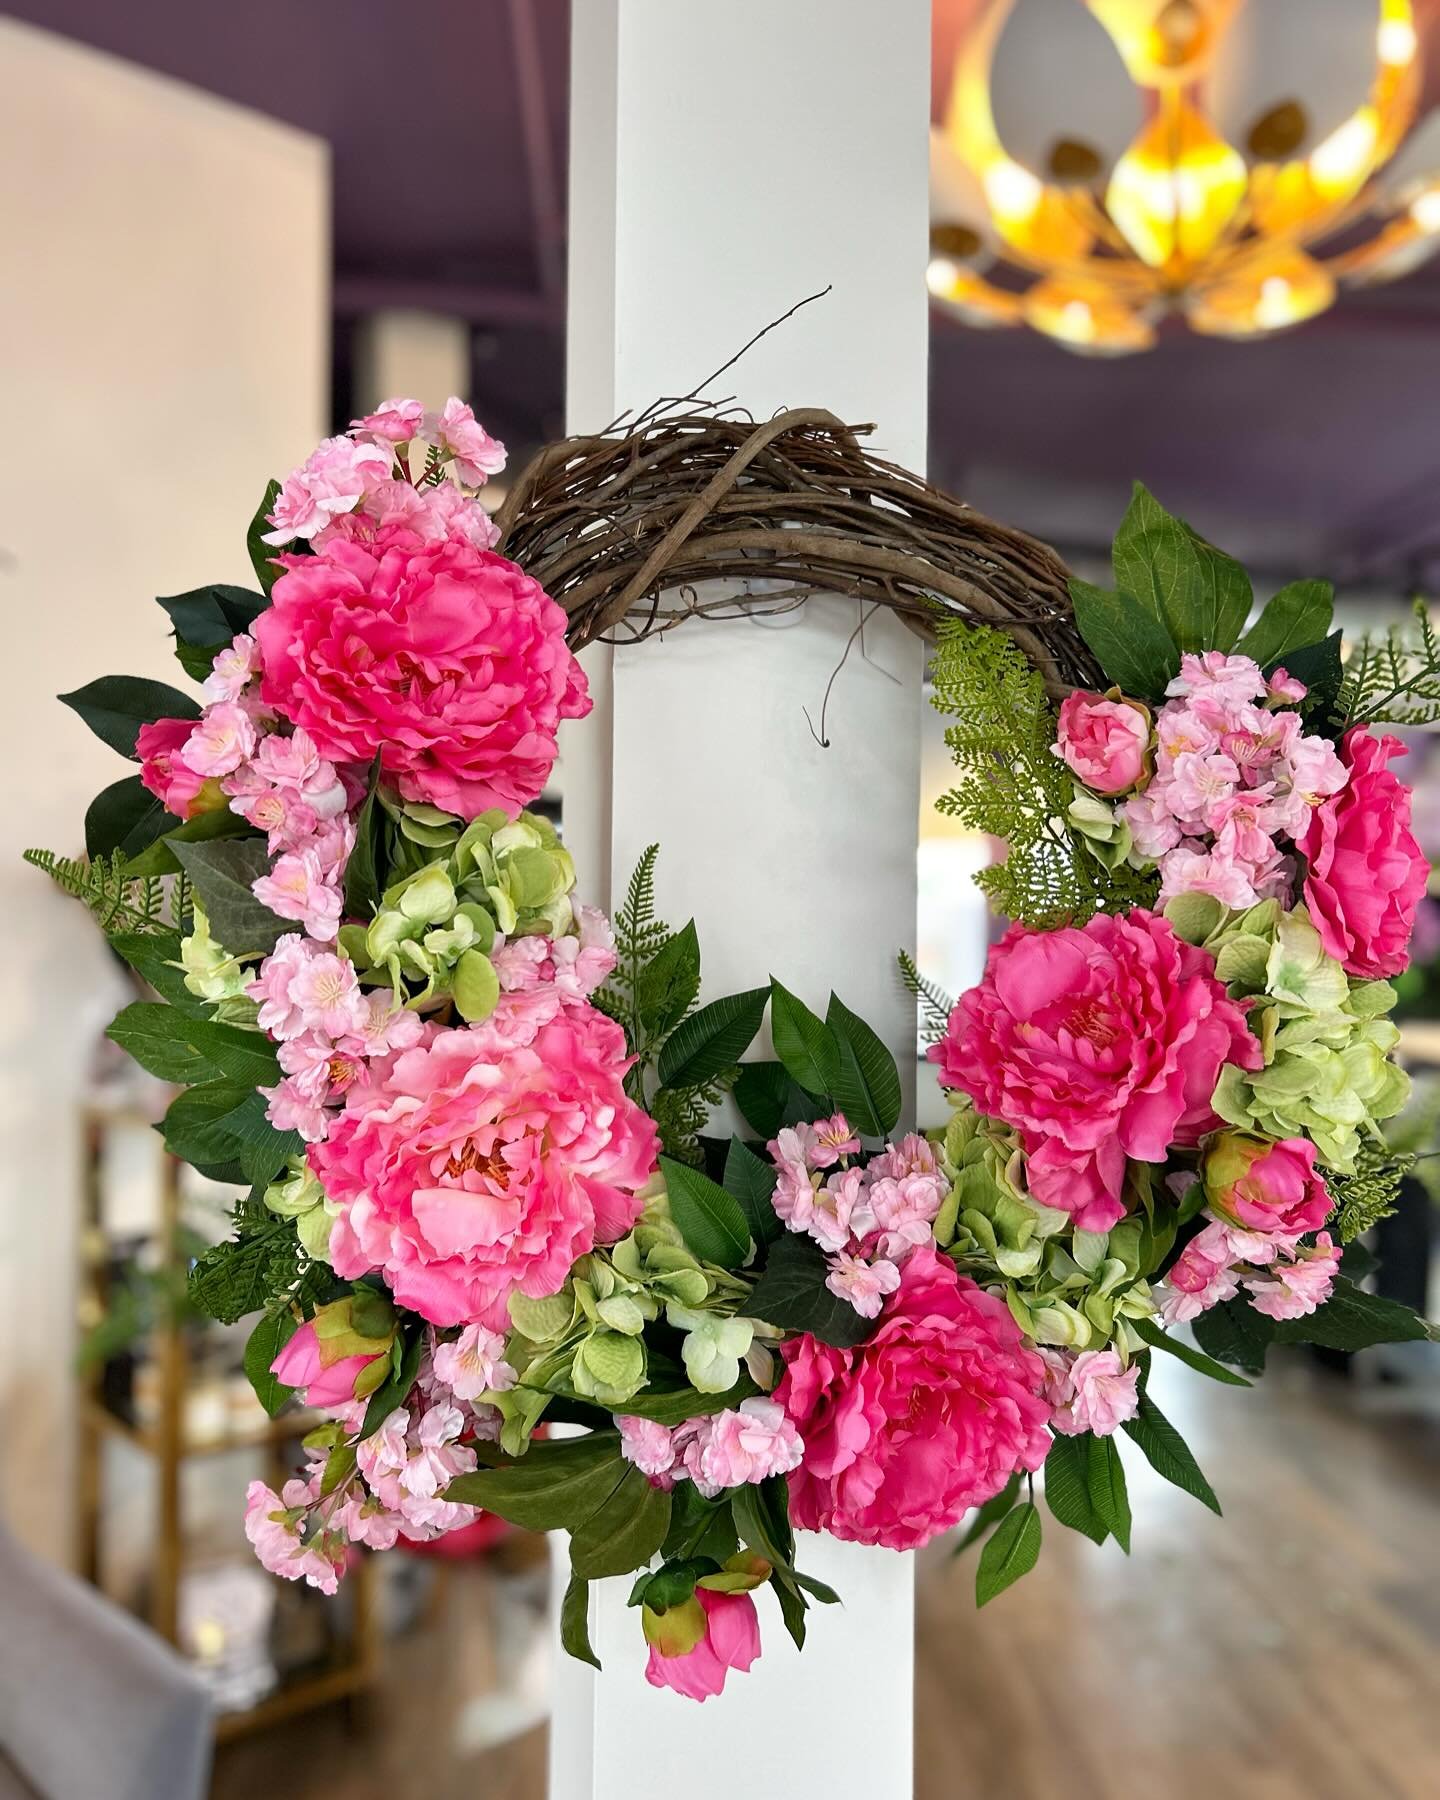 Last night we hosted an awesome spring wreath making workshop at the studio! Spring vibes were much needed on a rainy evening but the peonies were out in full force! Check out some of the gorgeous wreaths made with beautiful faux florals by @dvflora!